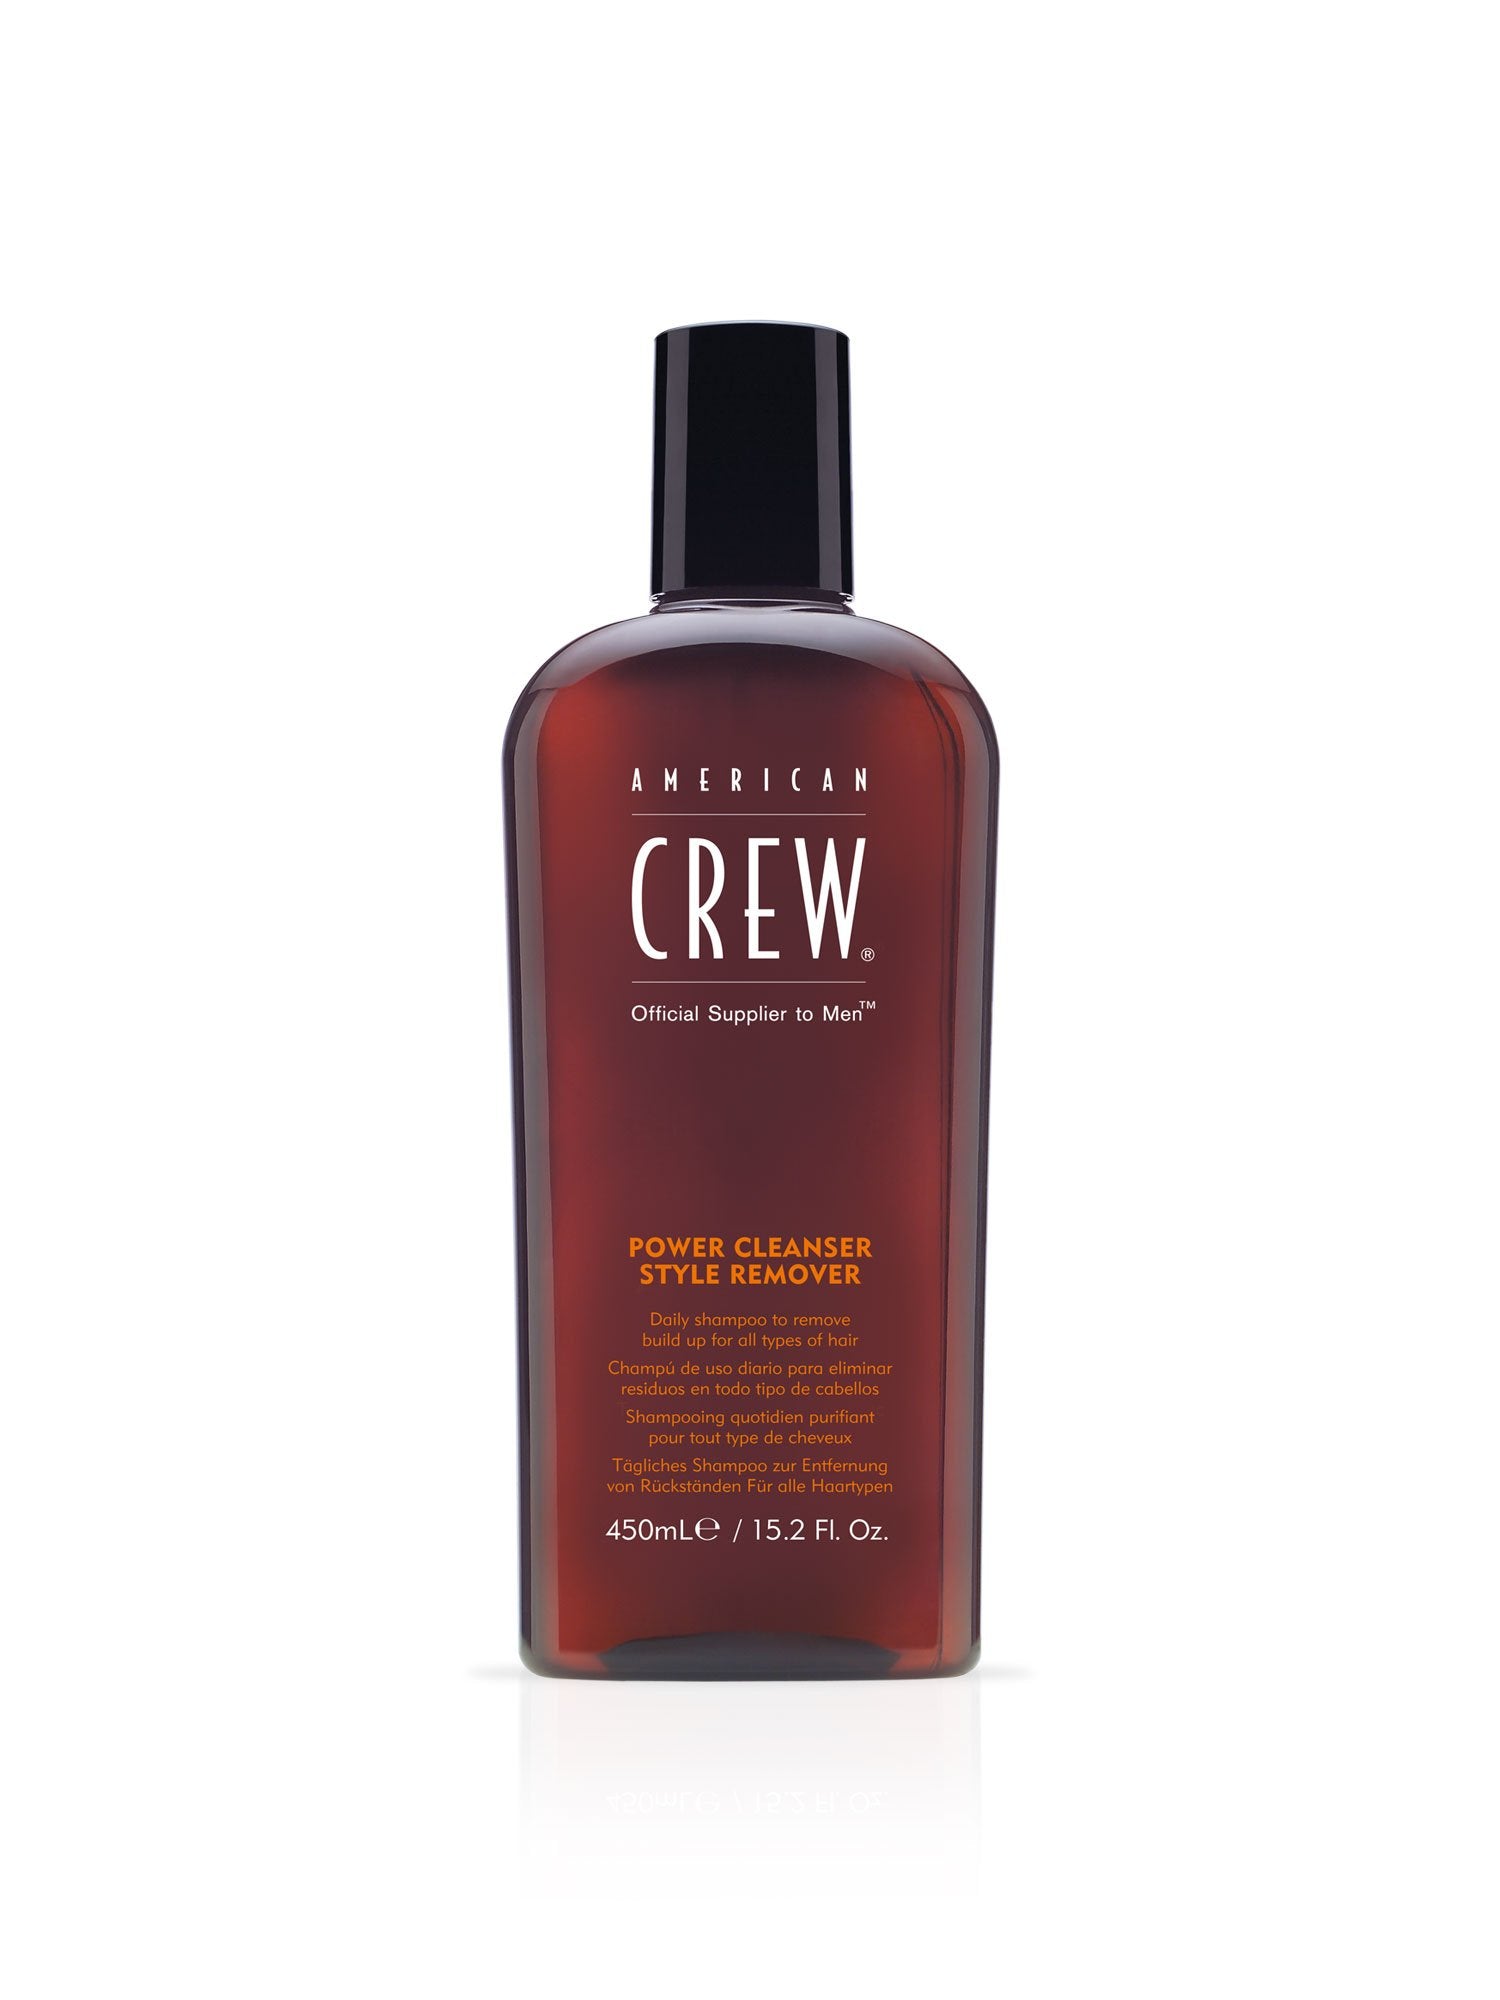 American Crew - Power Cleanser Style Remover - 450ml - by American Crew |ProCare Outlet|